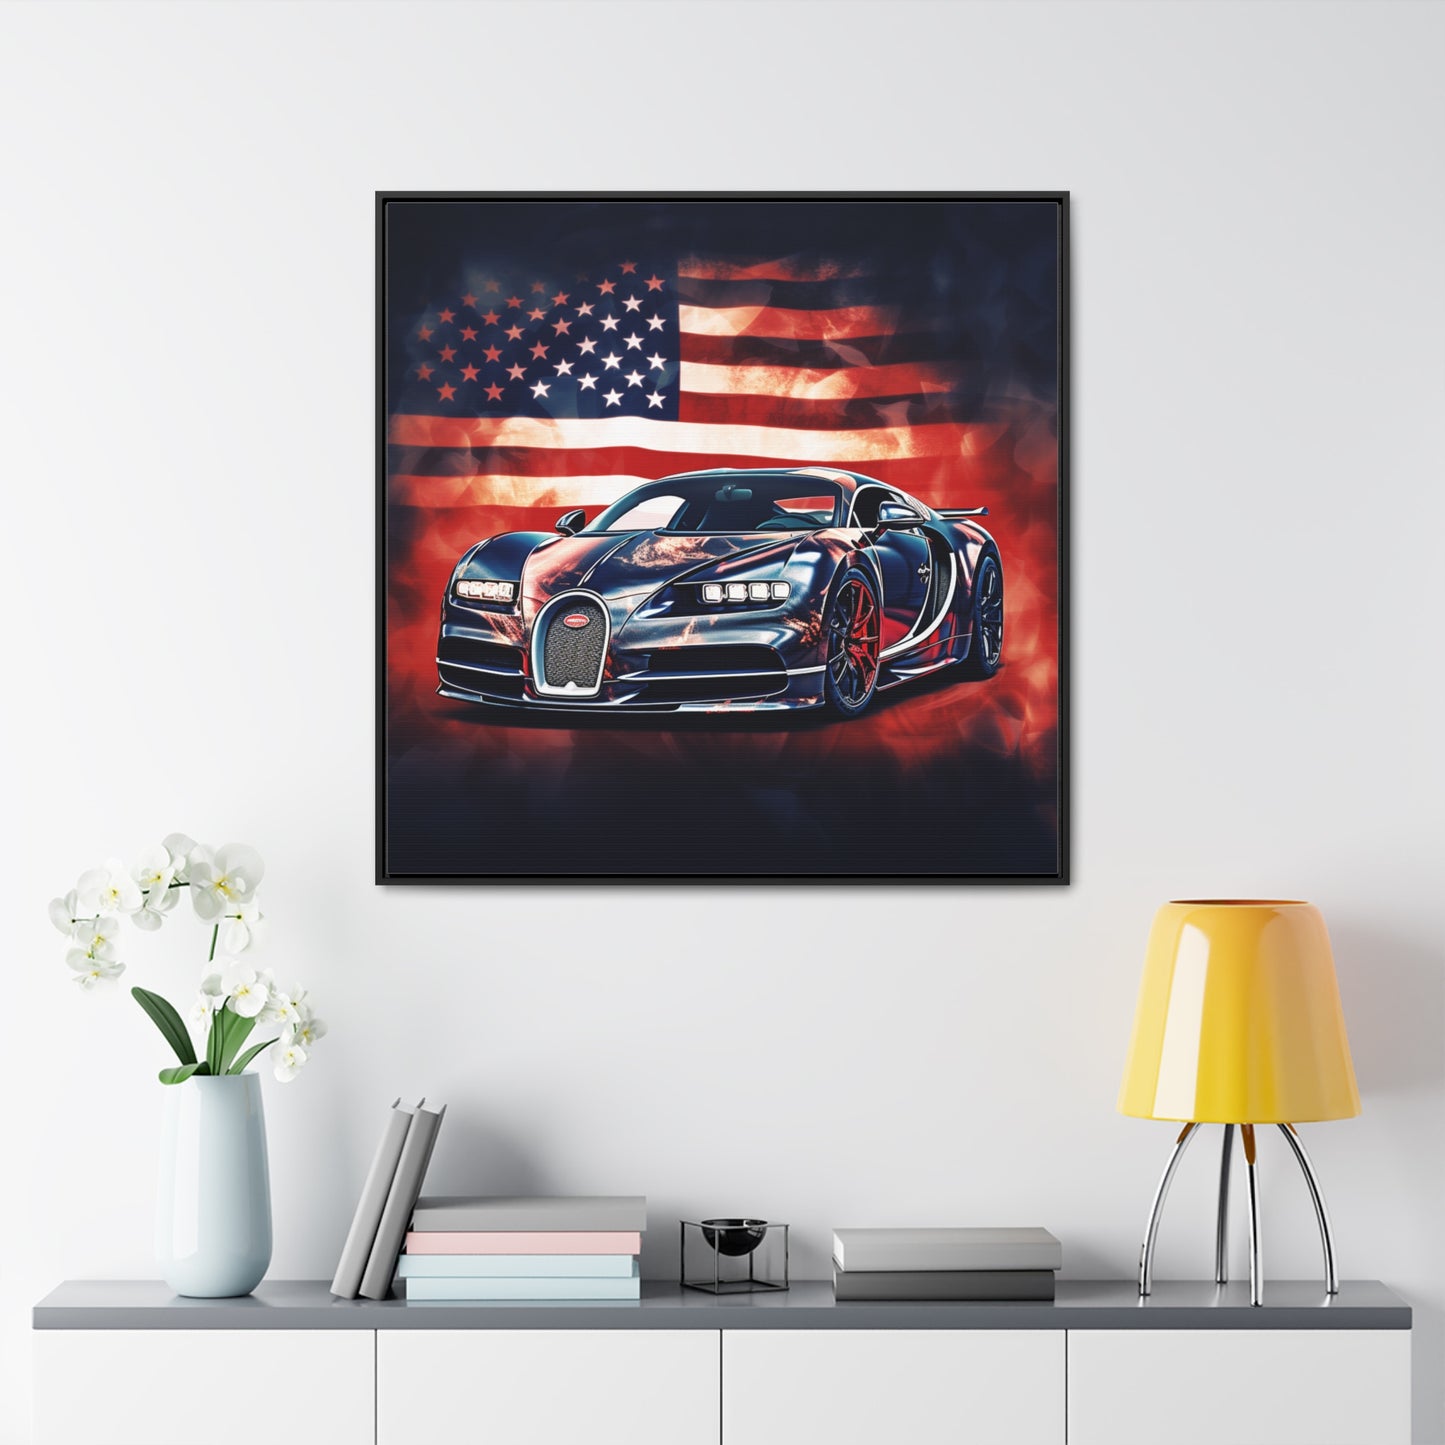 Gallery Canvas Wraps, Square Frame Abstract American Flag Background Bugatti 4